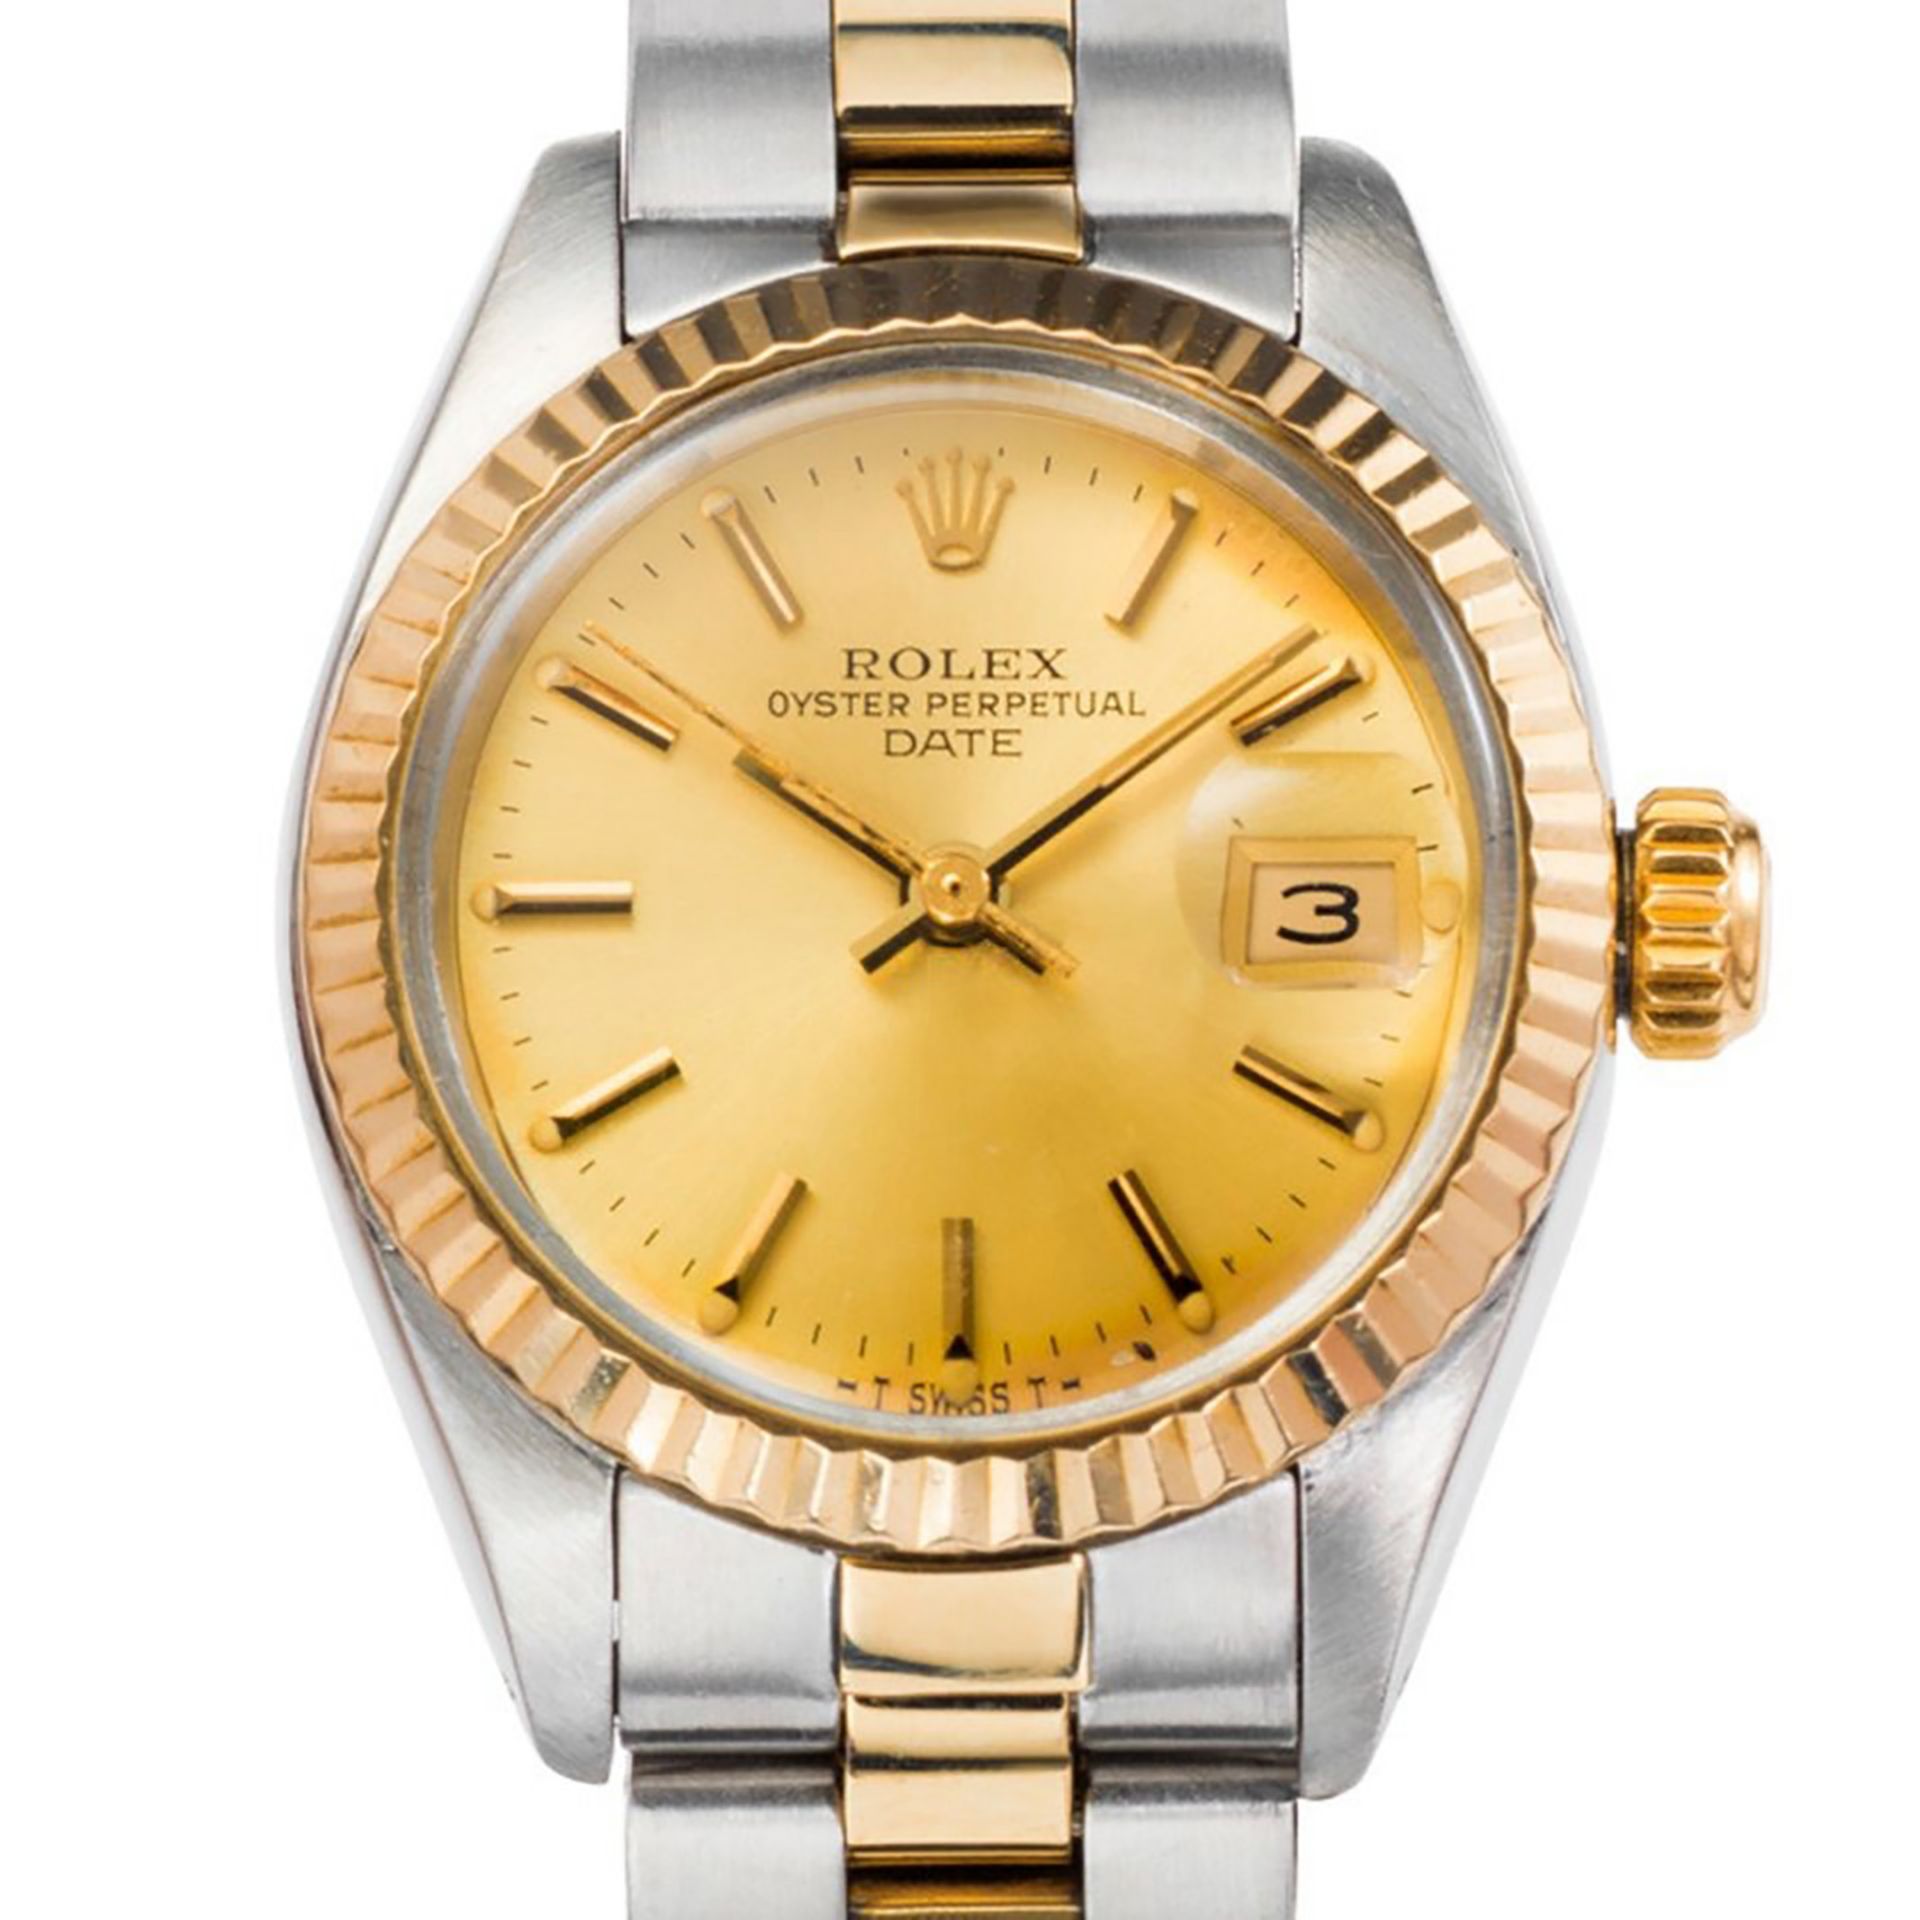 Rolex Lady Datejust wristwatch, in gold and steel, year 1981 - Image 5 of 5